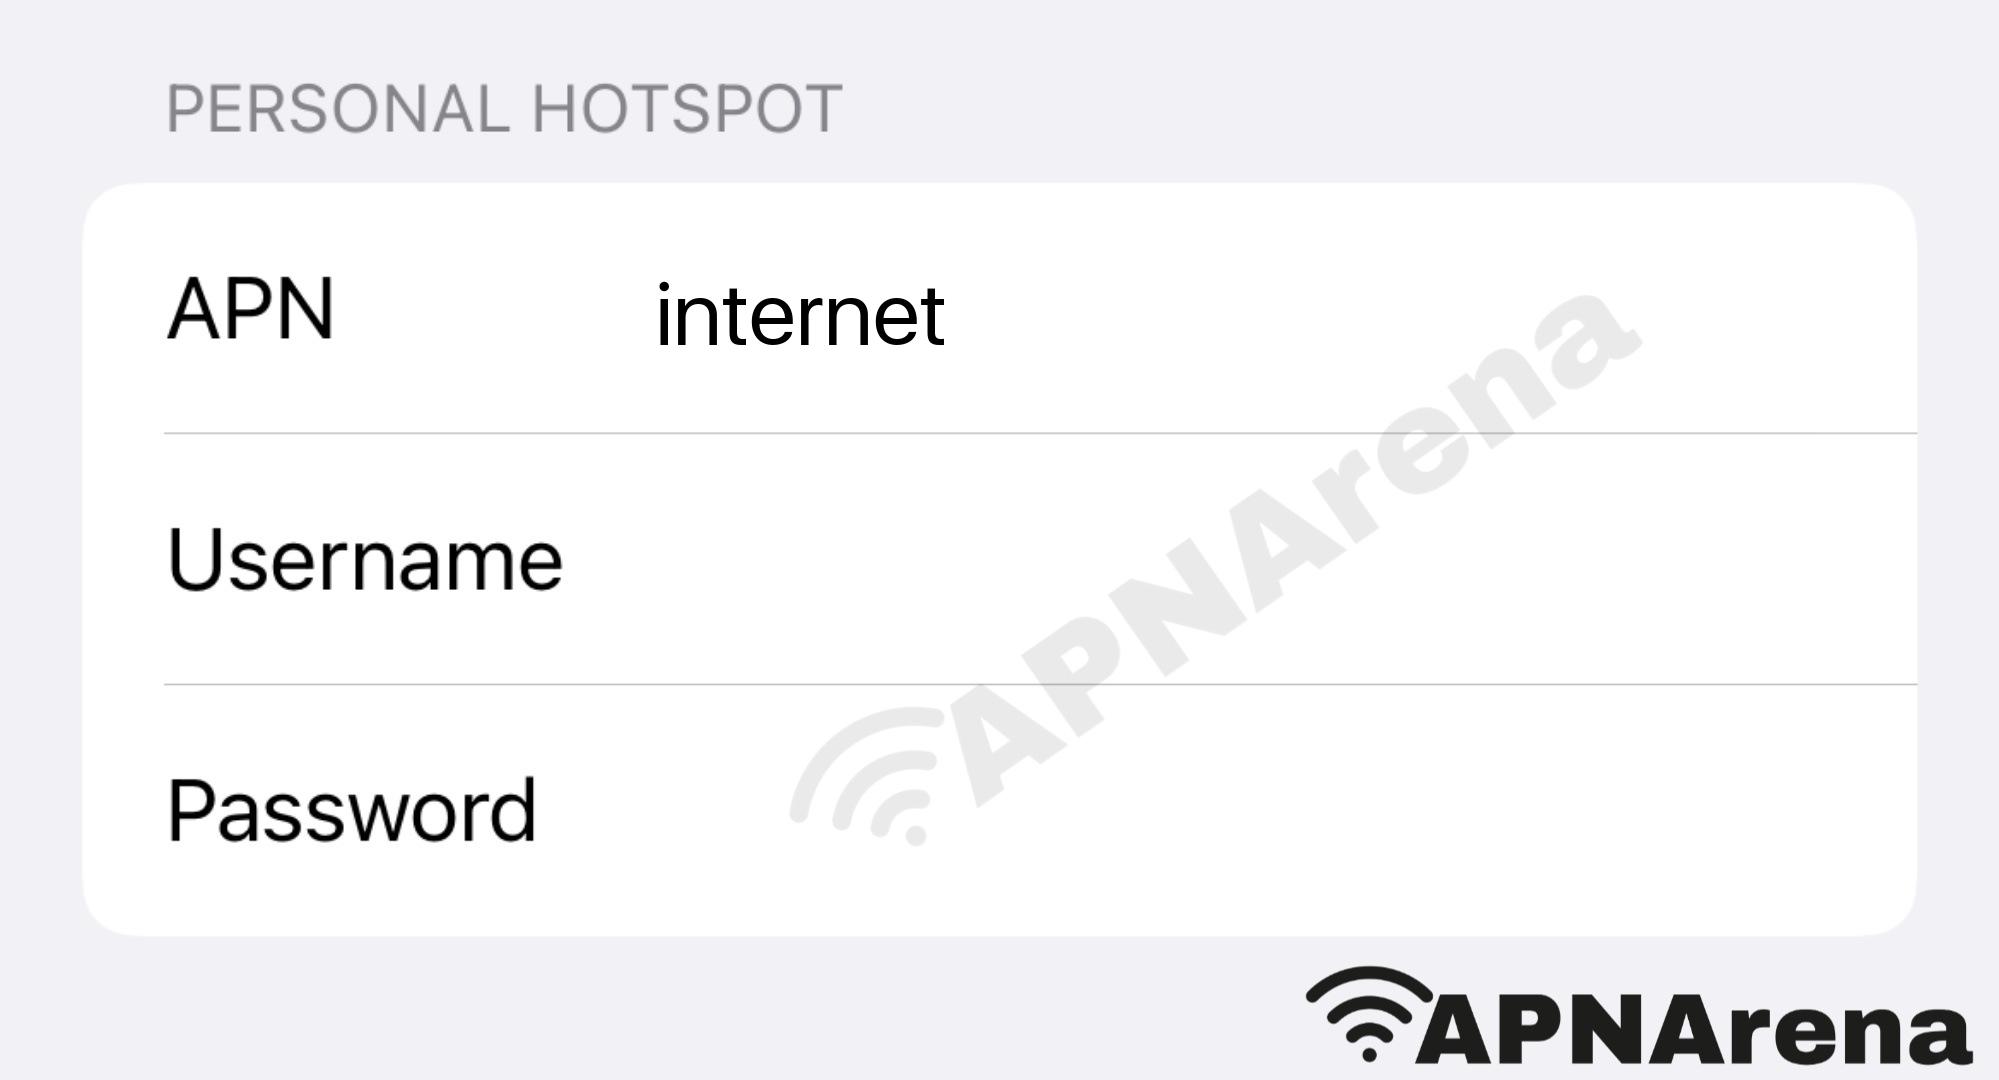 7-Eleven Speak out Personal Hotspot Settings for iPhone